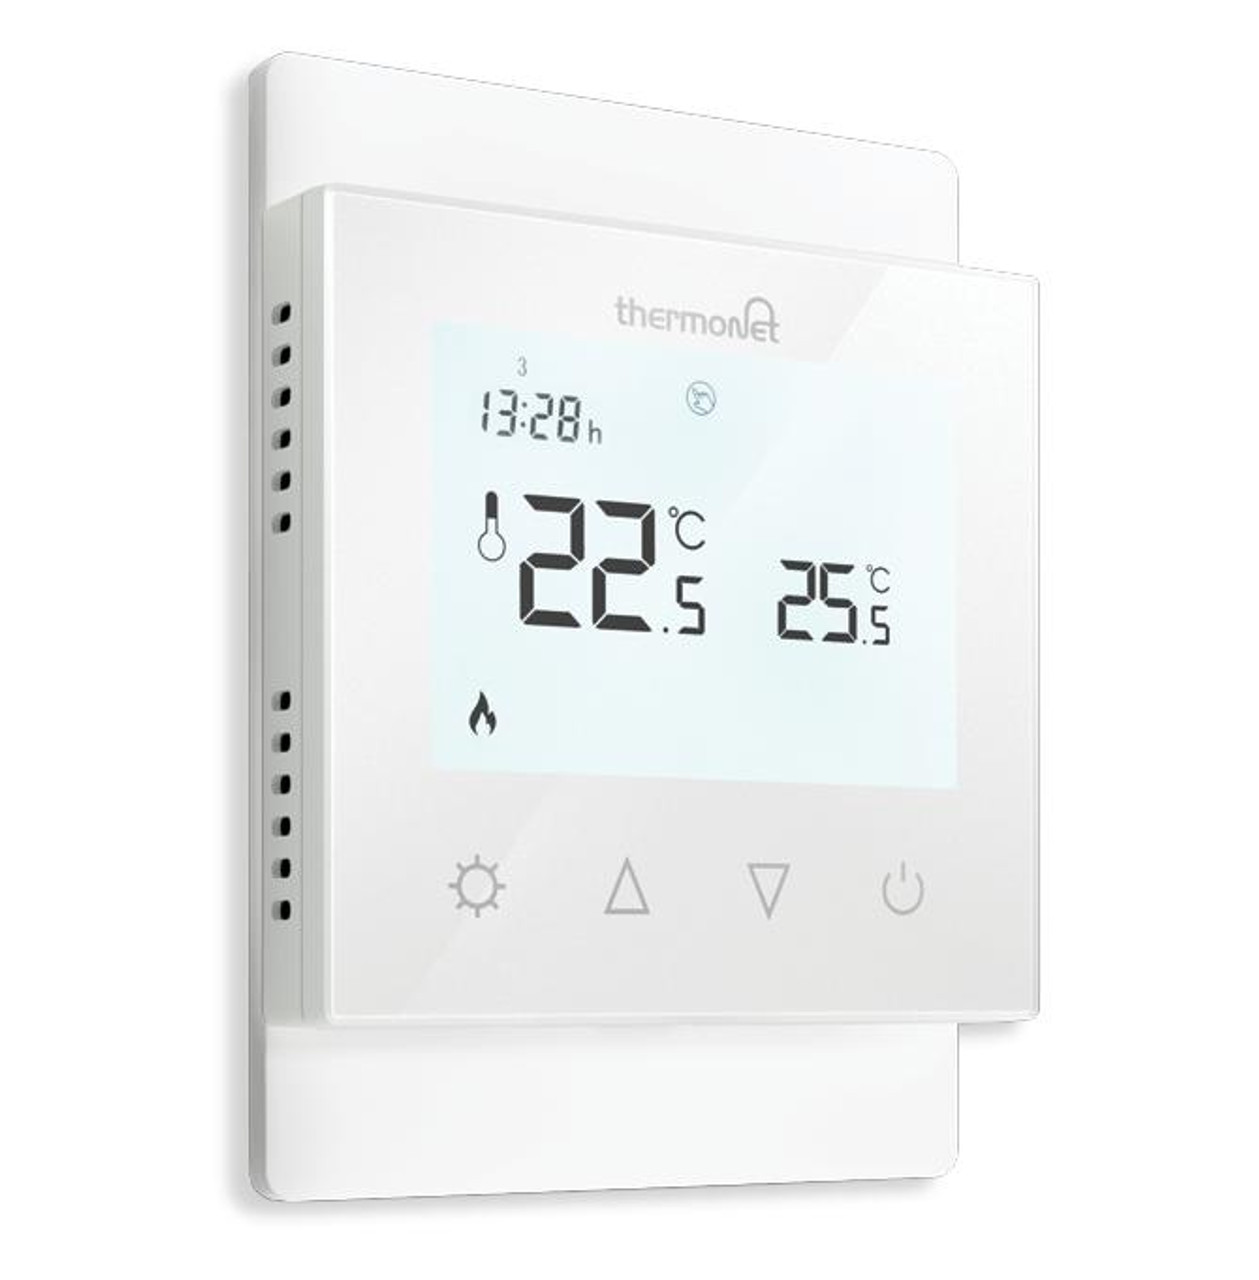 Thermonet EZ 150W/m² Underfloor Heating Kit 115028T with Programmable Thermostat 5220A (14m²)